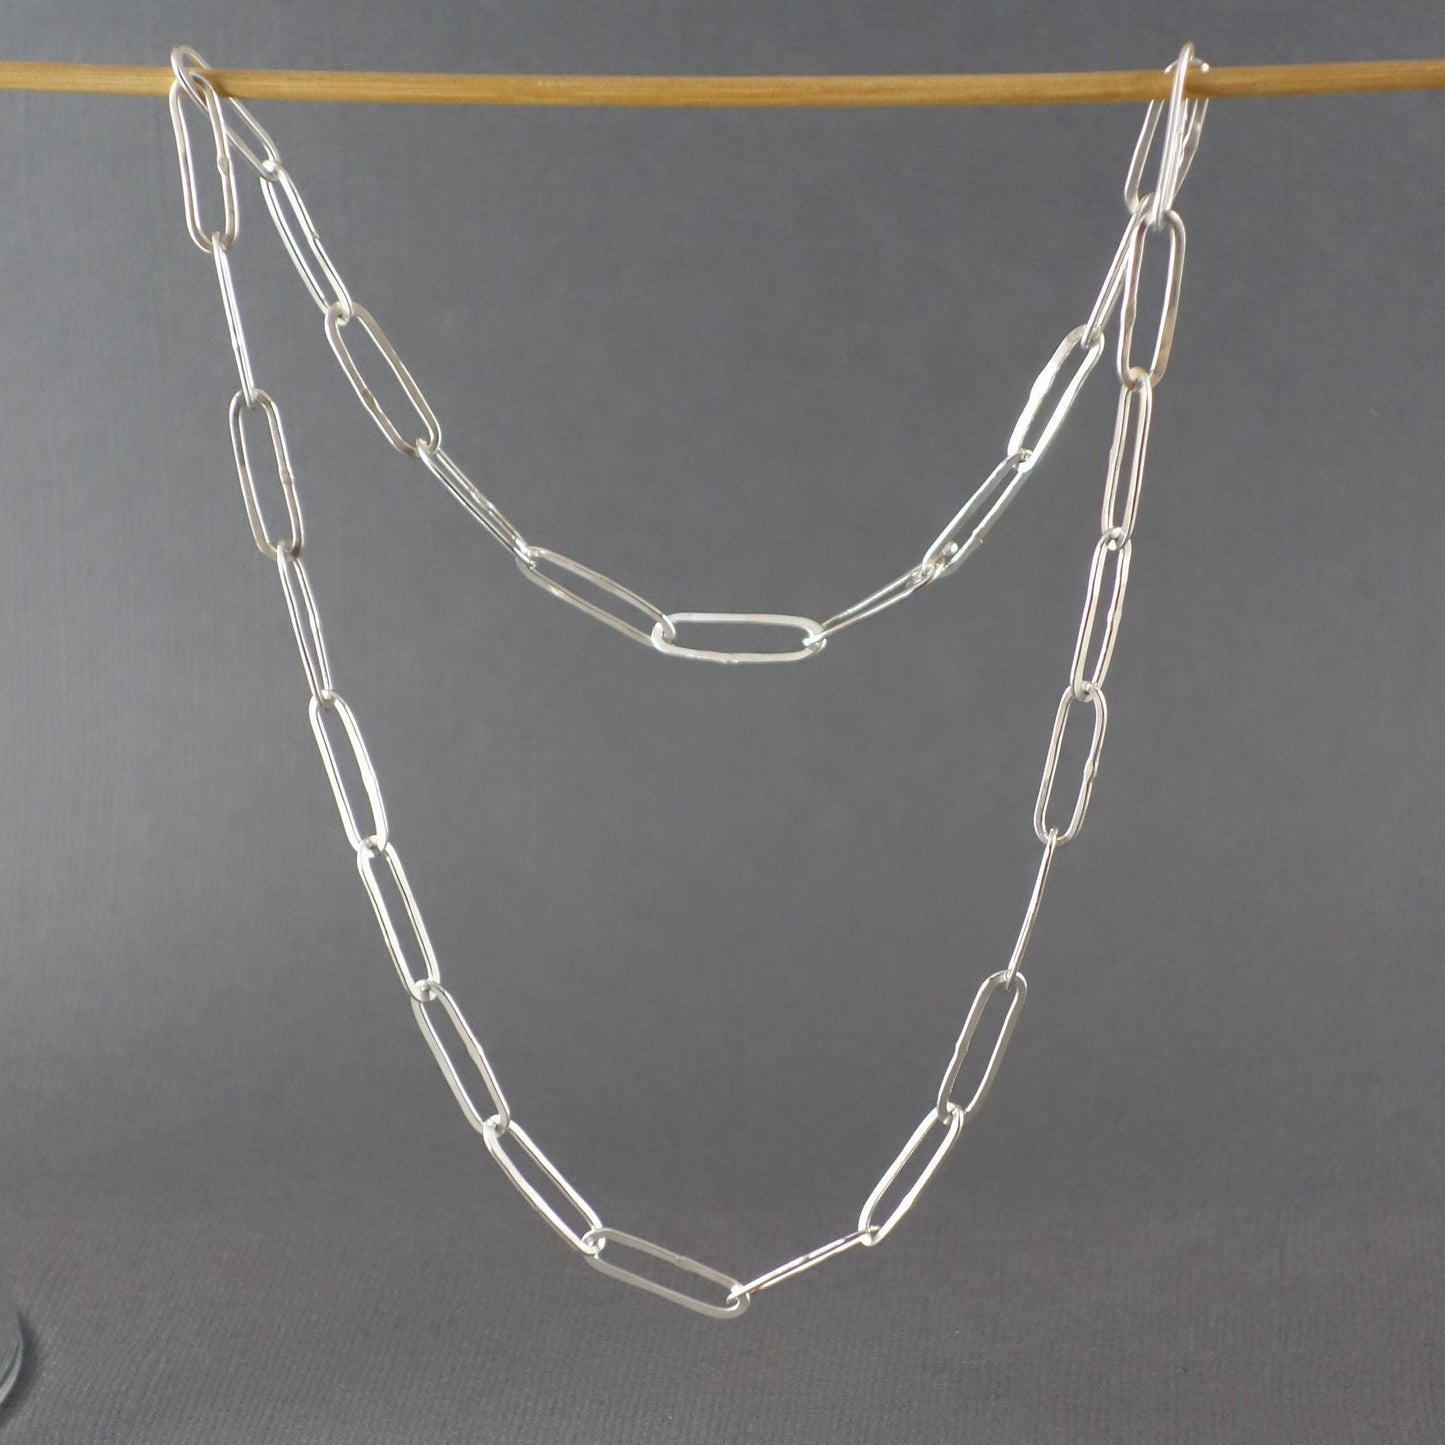 Shiny Paperclip Necklace, Silver Paperclip Necklace, Paperclip Chain, Silver Paperclip Chain, Heavy link necklace,